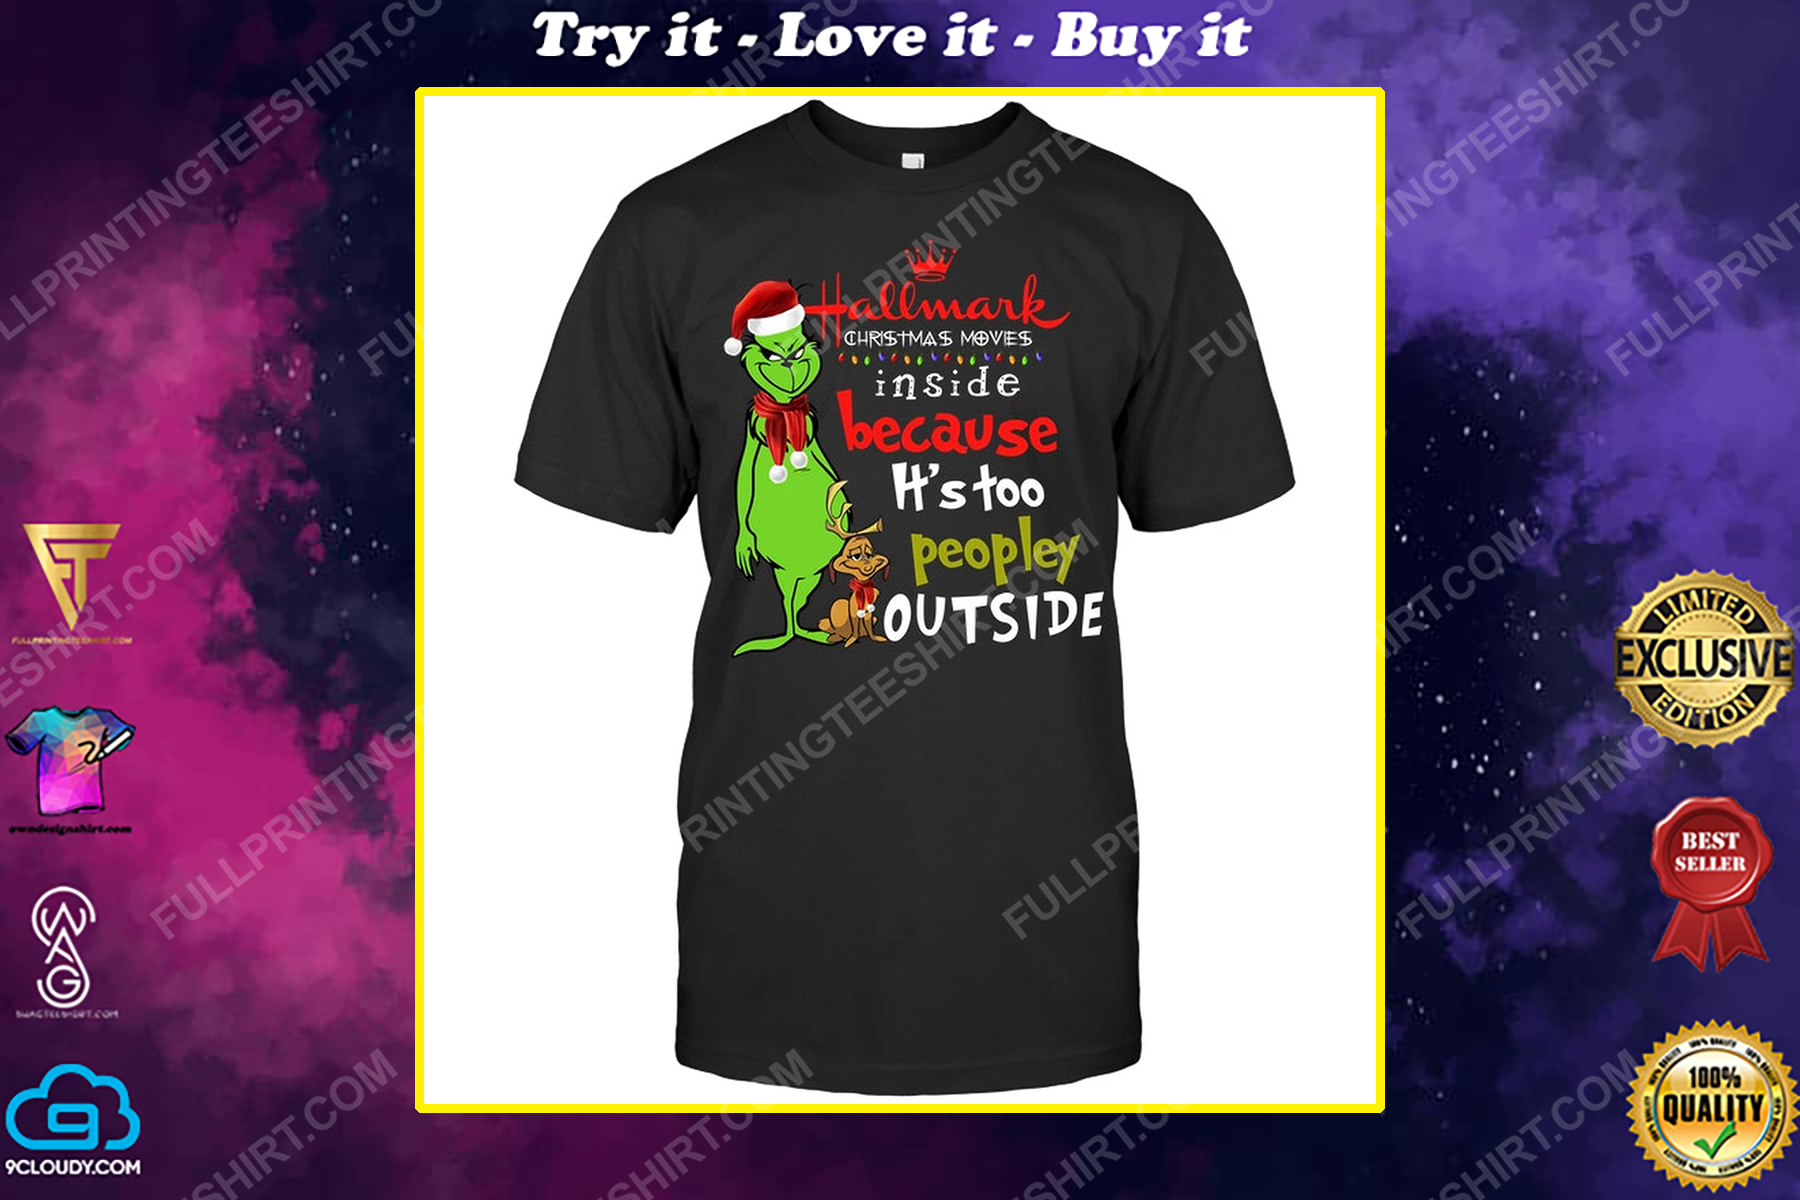 Hallmark christmas movies inside because it's too peopley outside grinch shirt